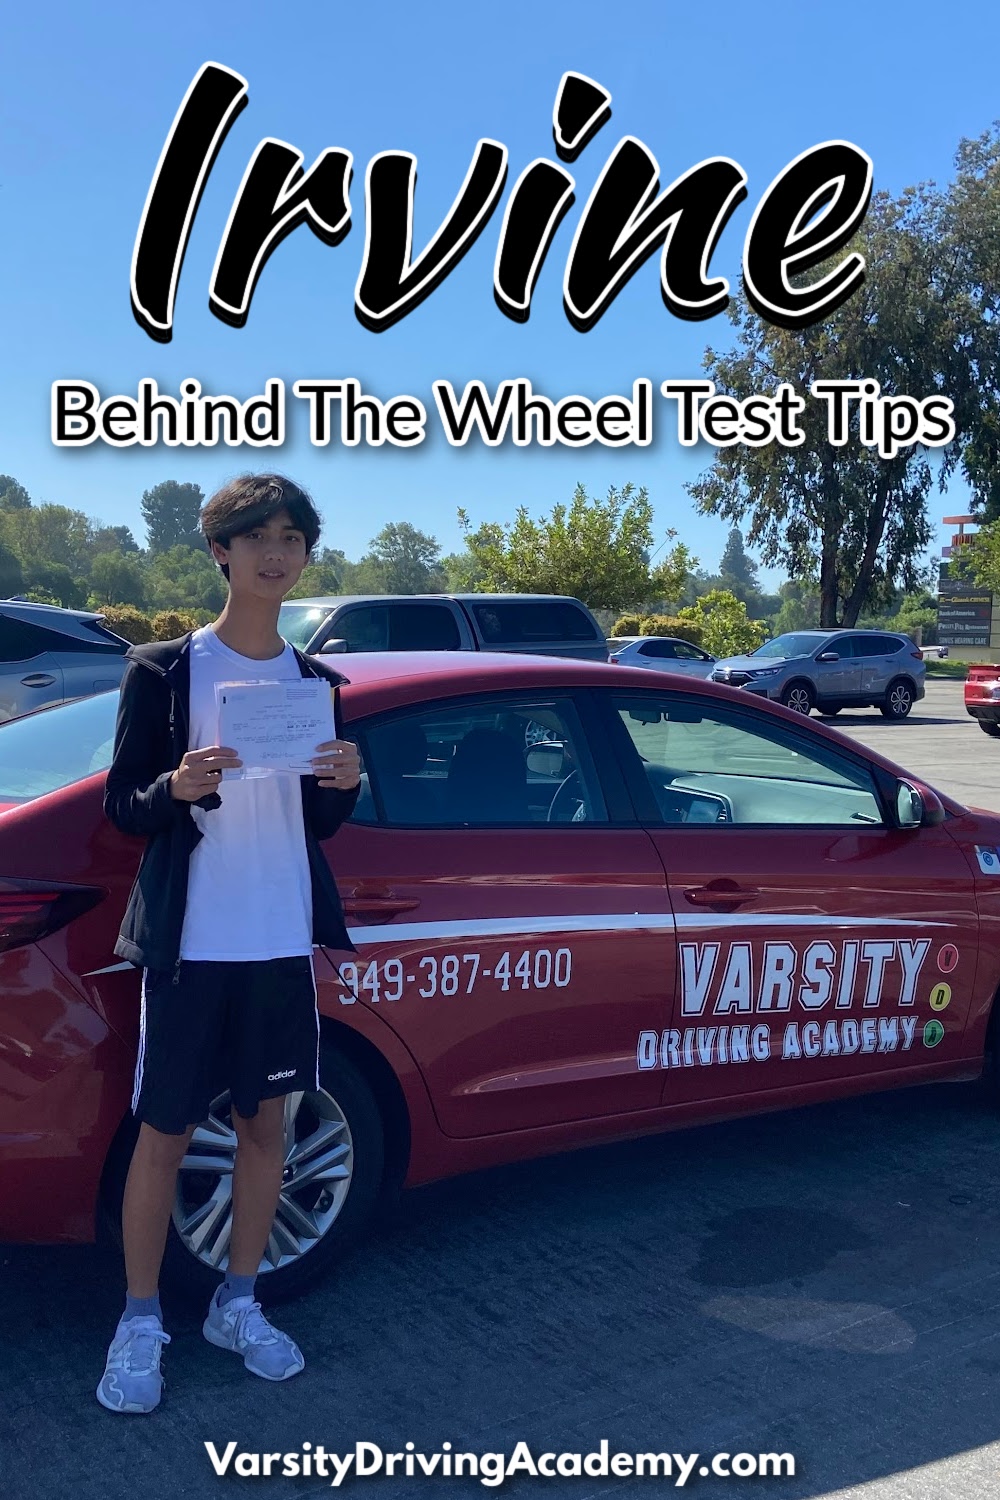 Students must complete a few steps before receiving a driver’s license and the behind the wheel test in Irvine is the last step for Irvine students.